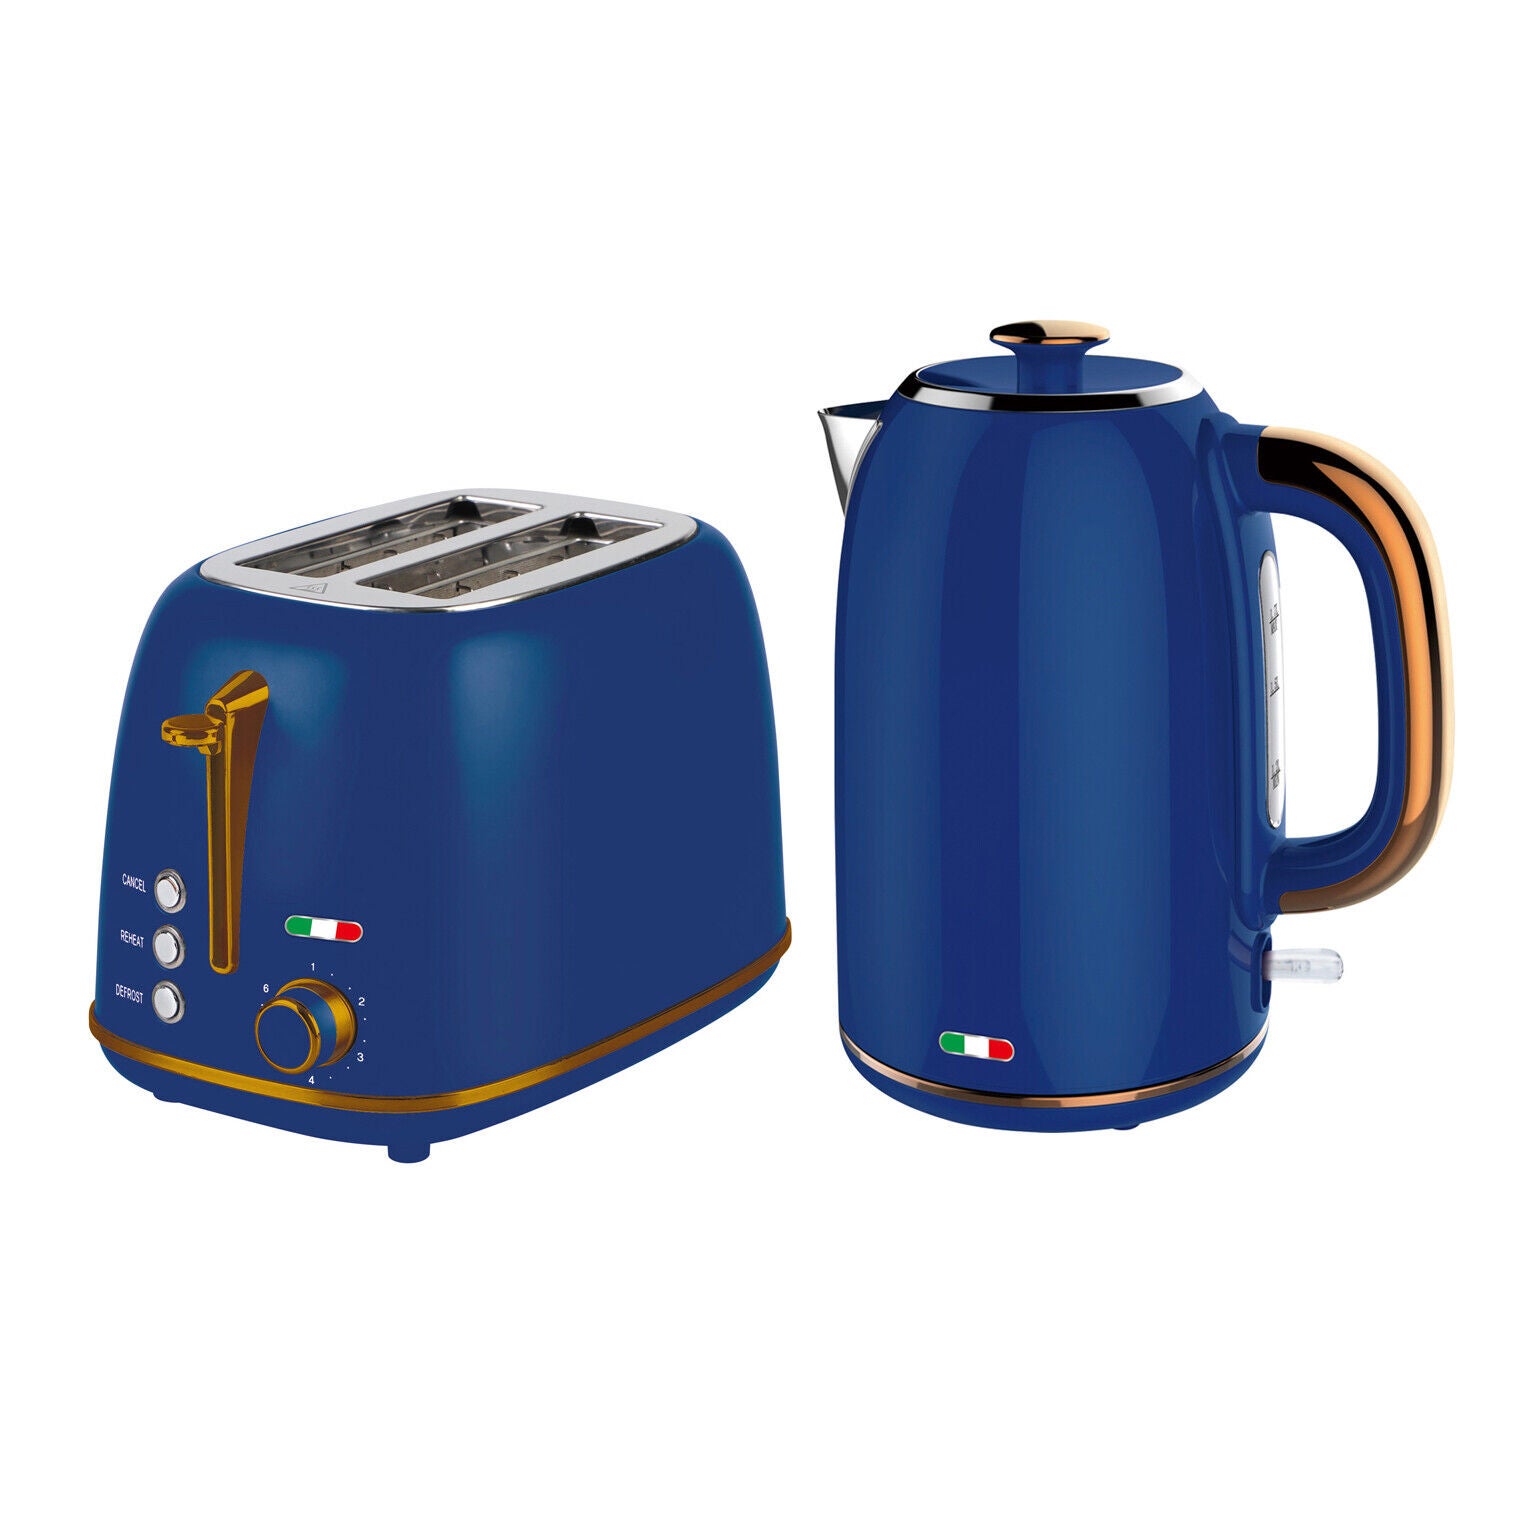 Vintage Electric Kettle and 2 Slice Toaster SET Combo Deal Stainless Steel Copper Blue